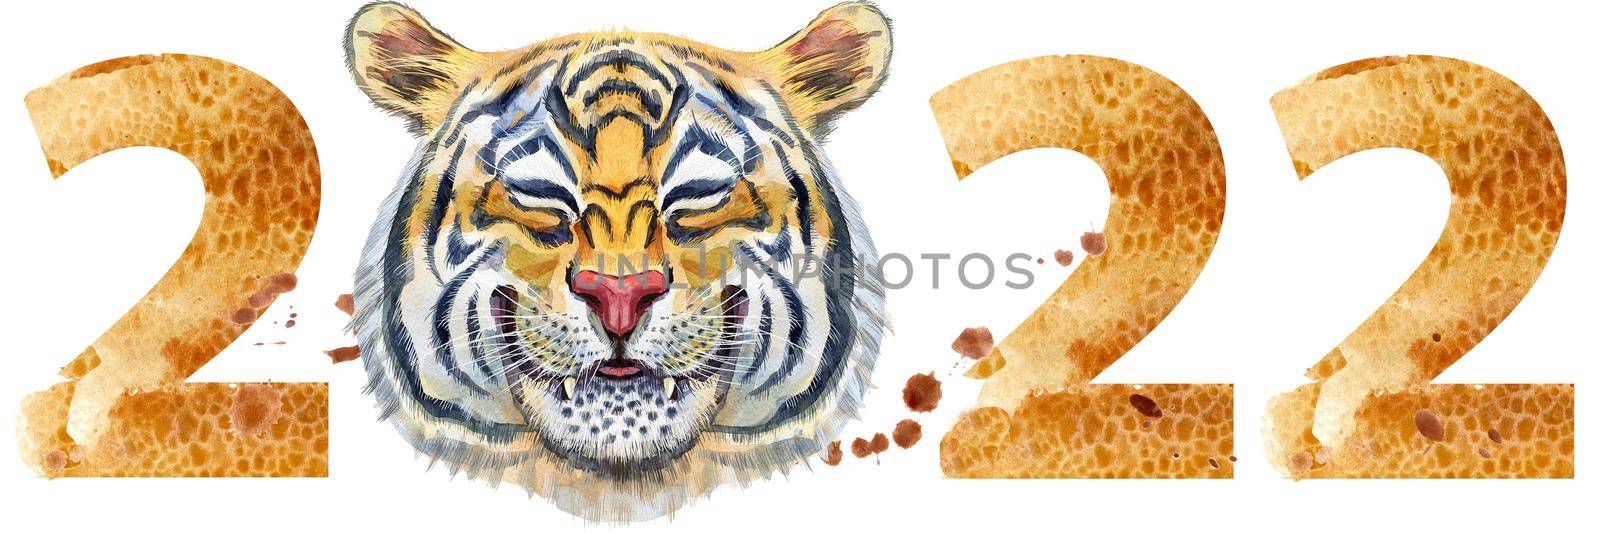 New year 2022 watercolor number with tiger head isolated on the white background